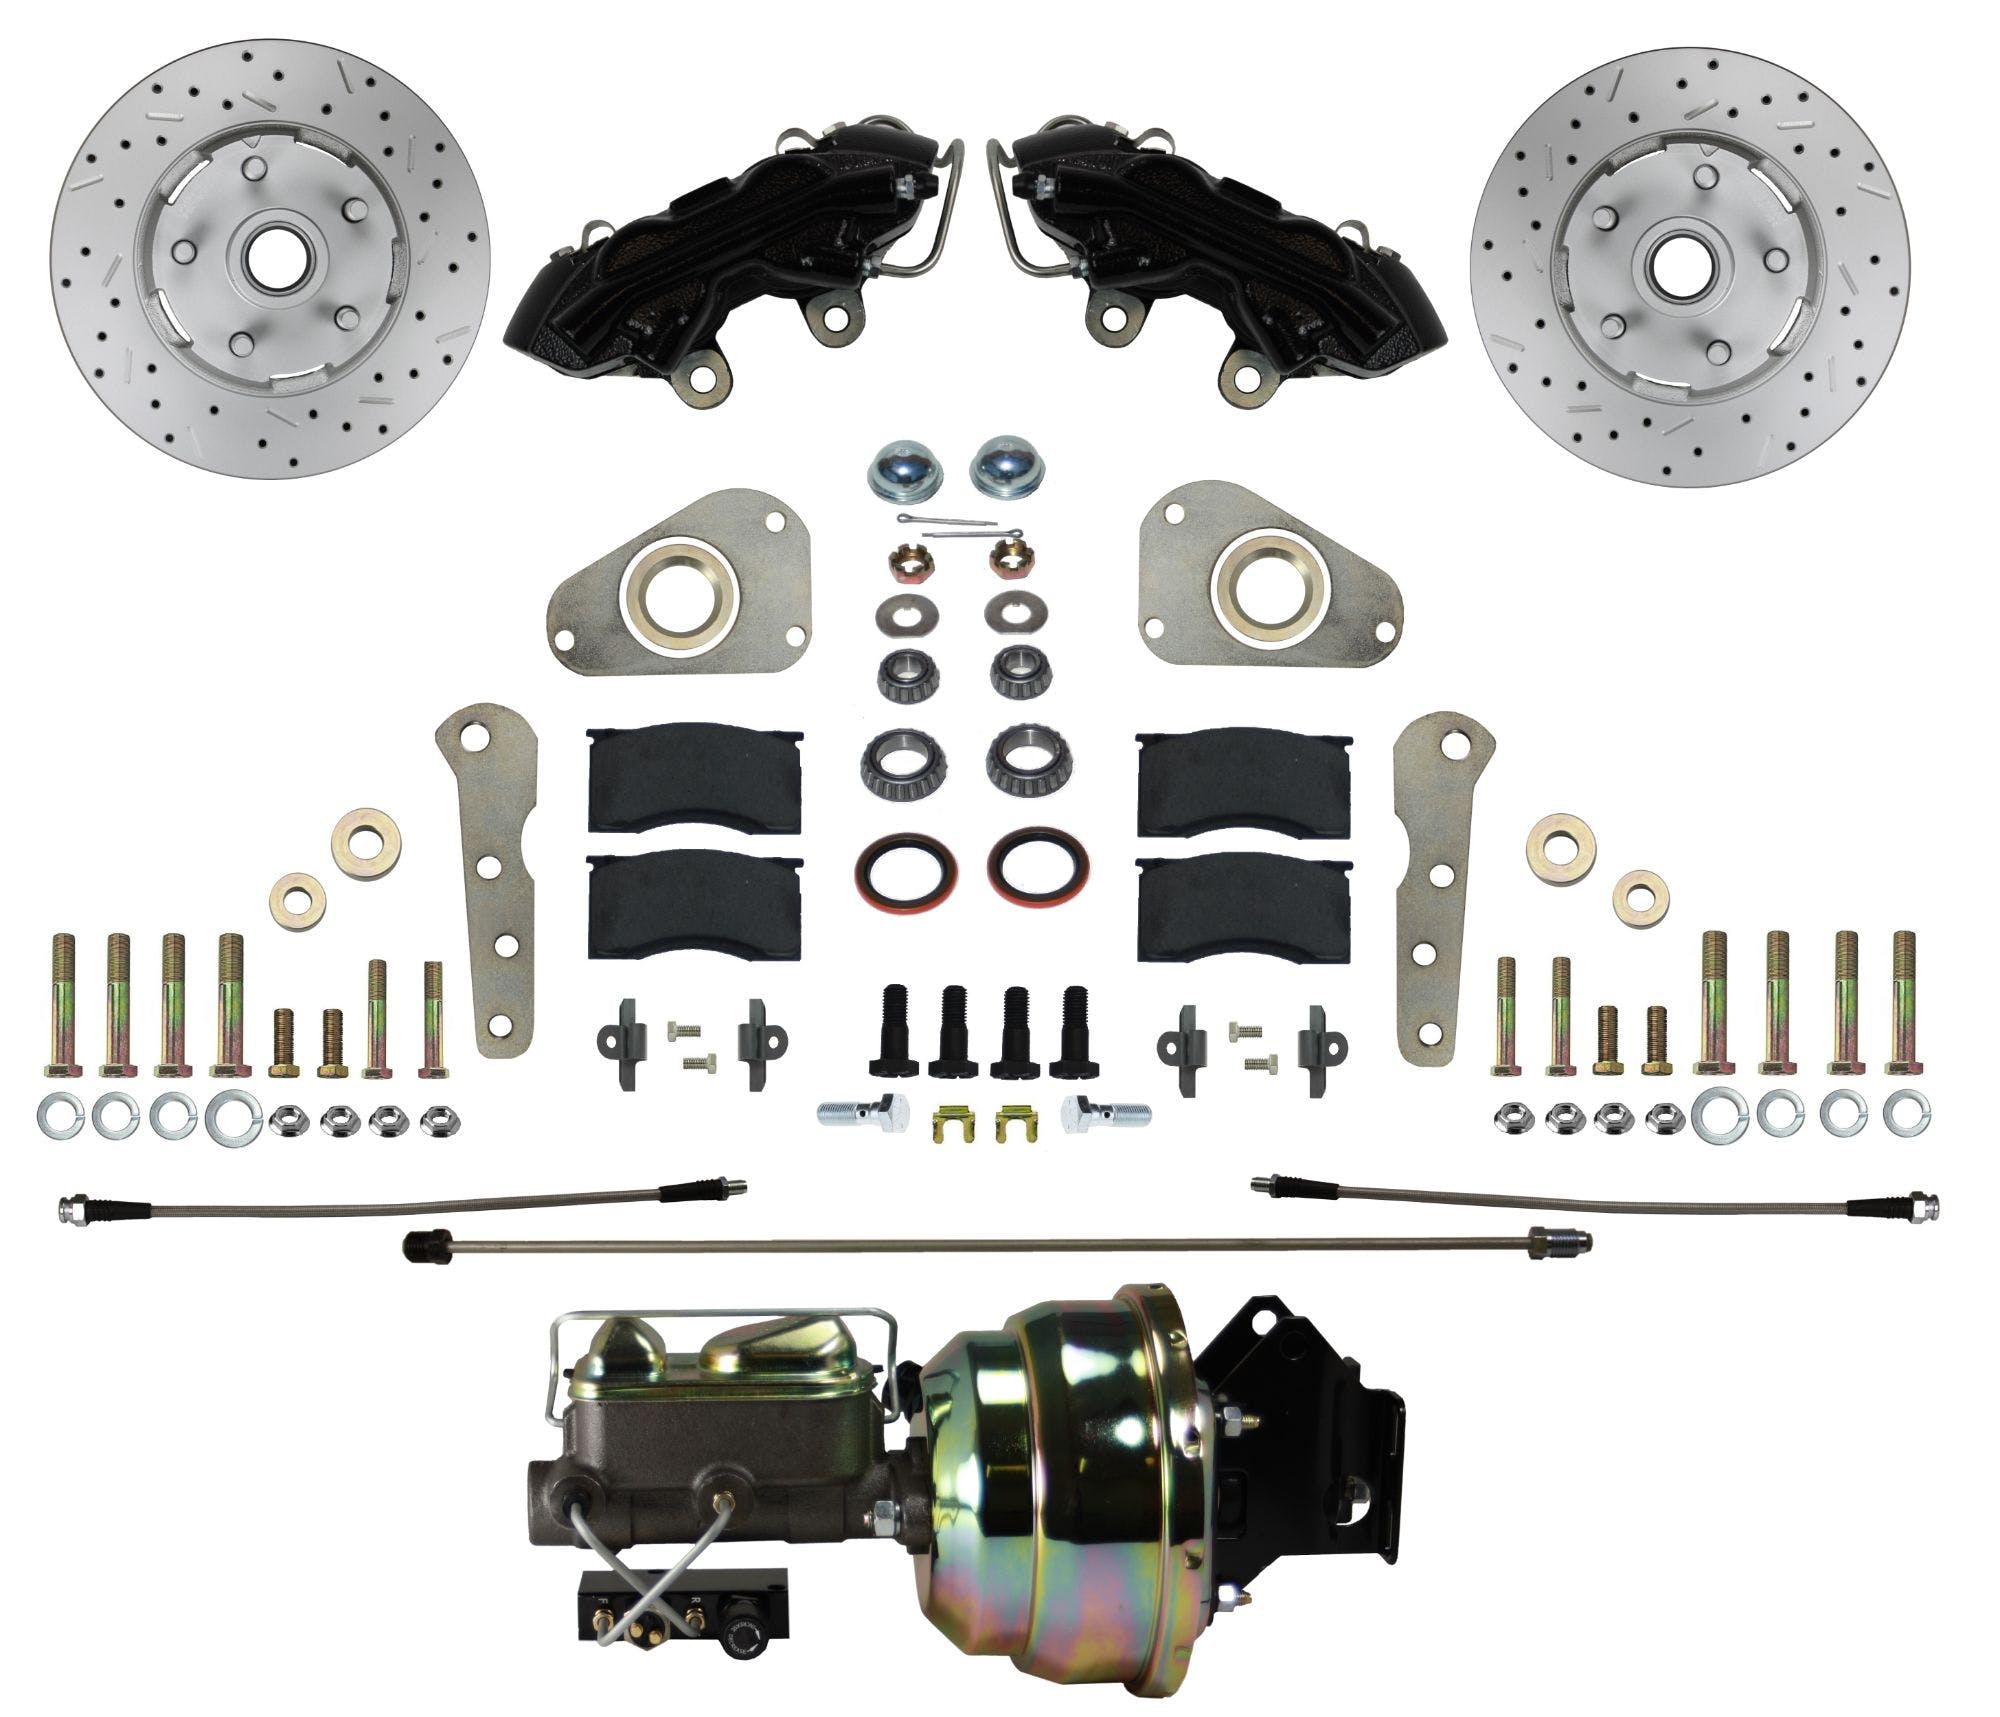 LEED Brakes BFC0025-8307X Ford Full Size Power Disc Conversion Kit with MaxGrip XDS - Black Powder Coat